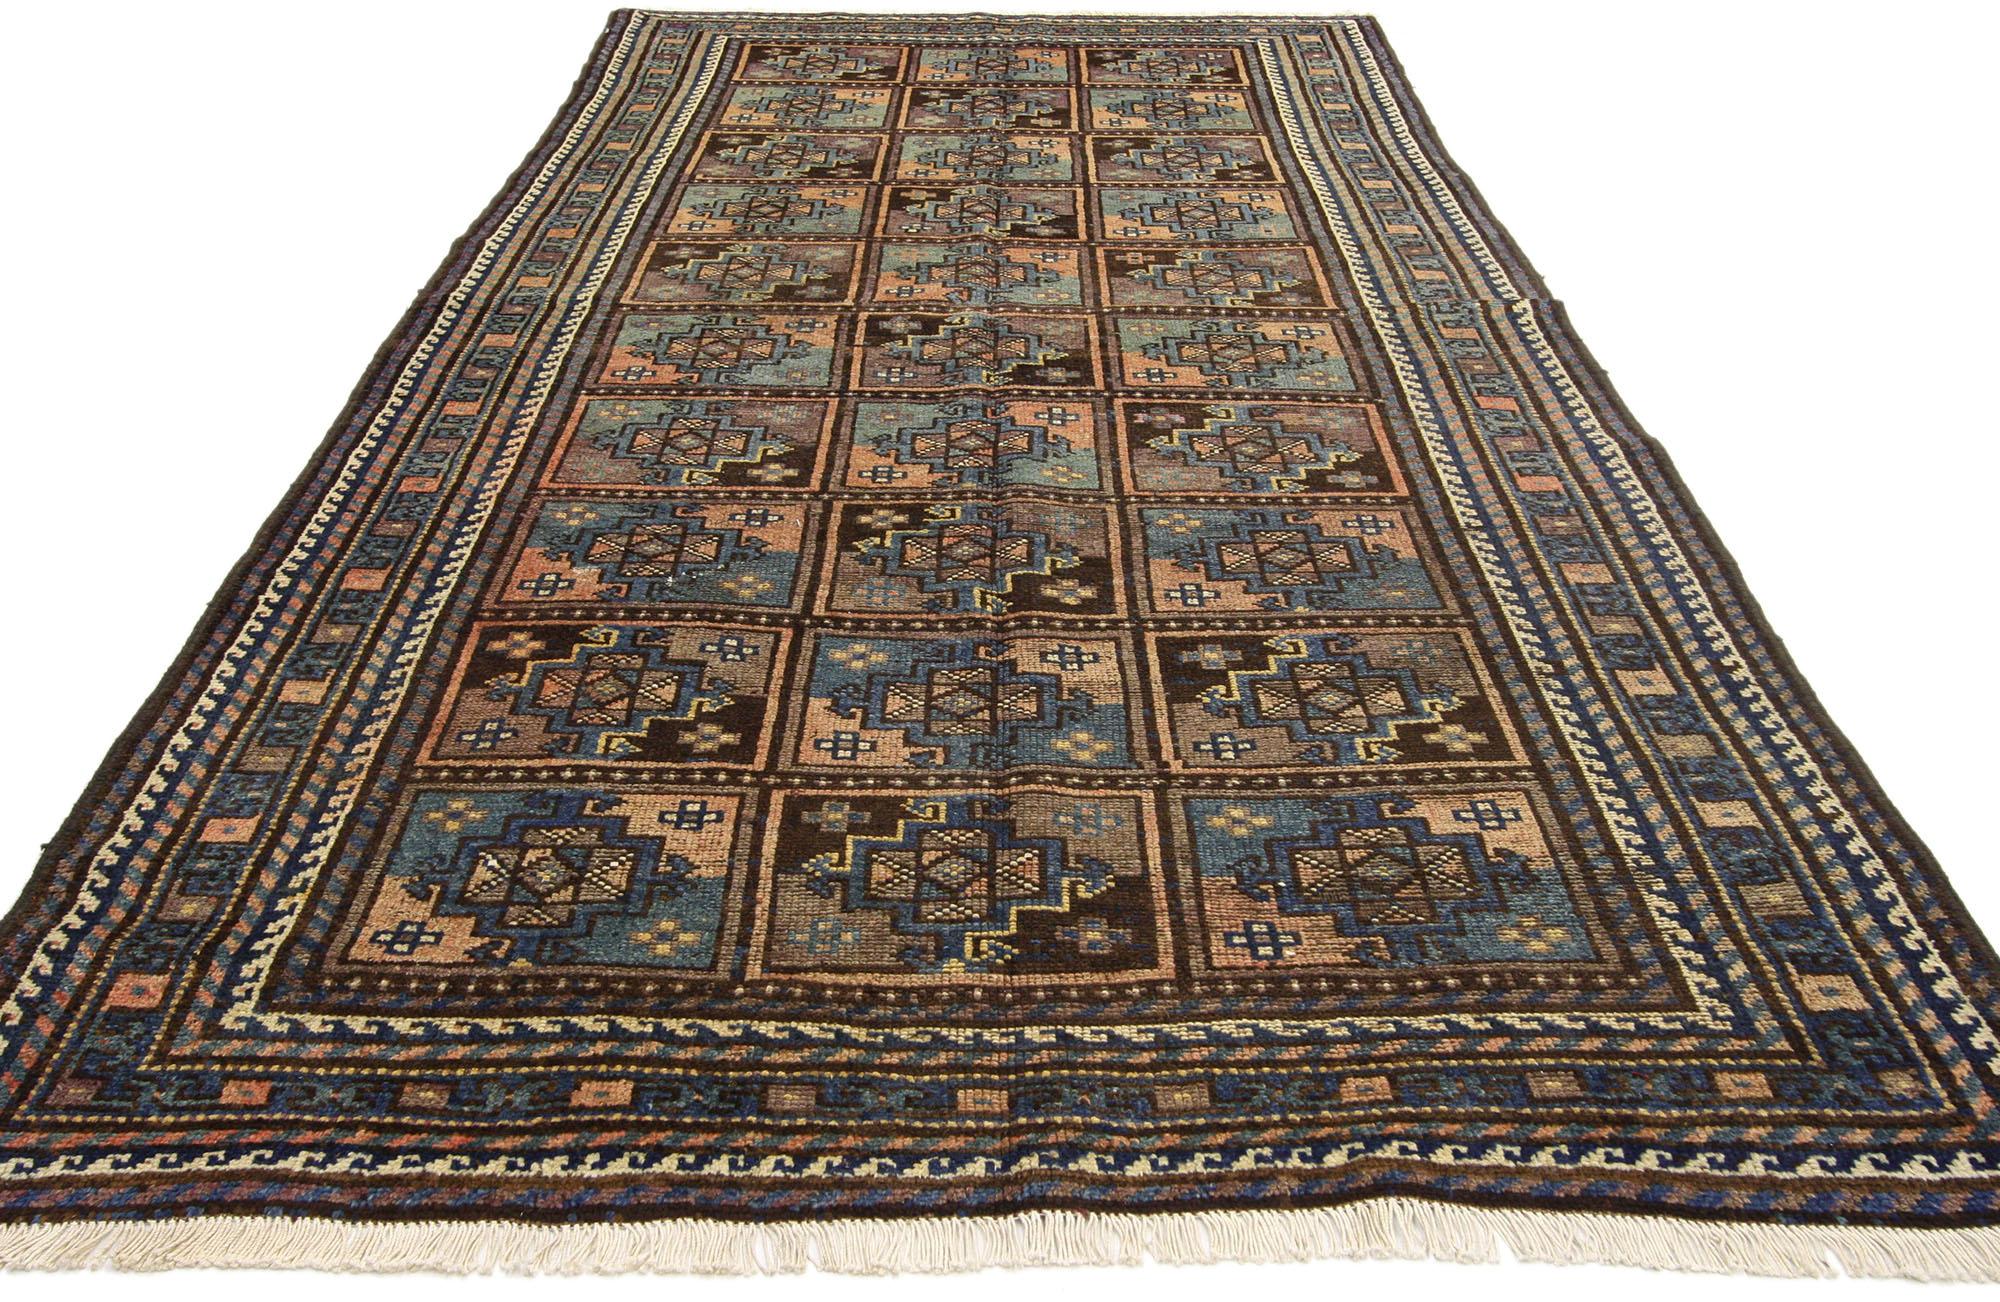 Hand-Knotted Vintage Shiraz Persian Rug with Mid-Century Modern Tribal Style